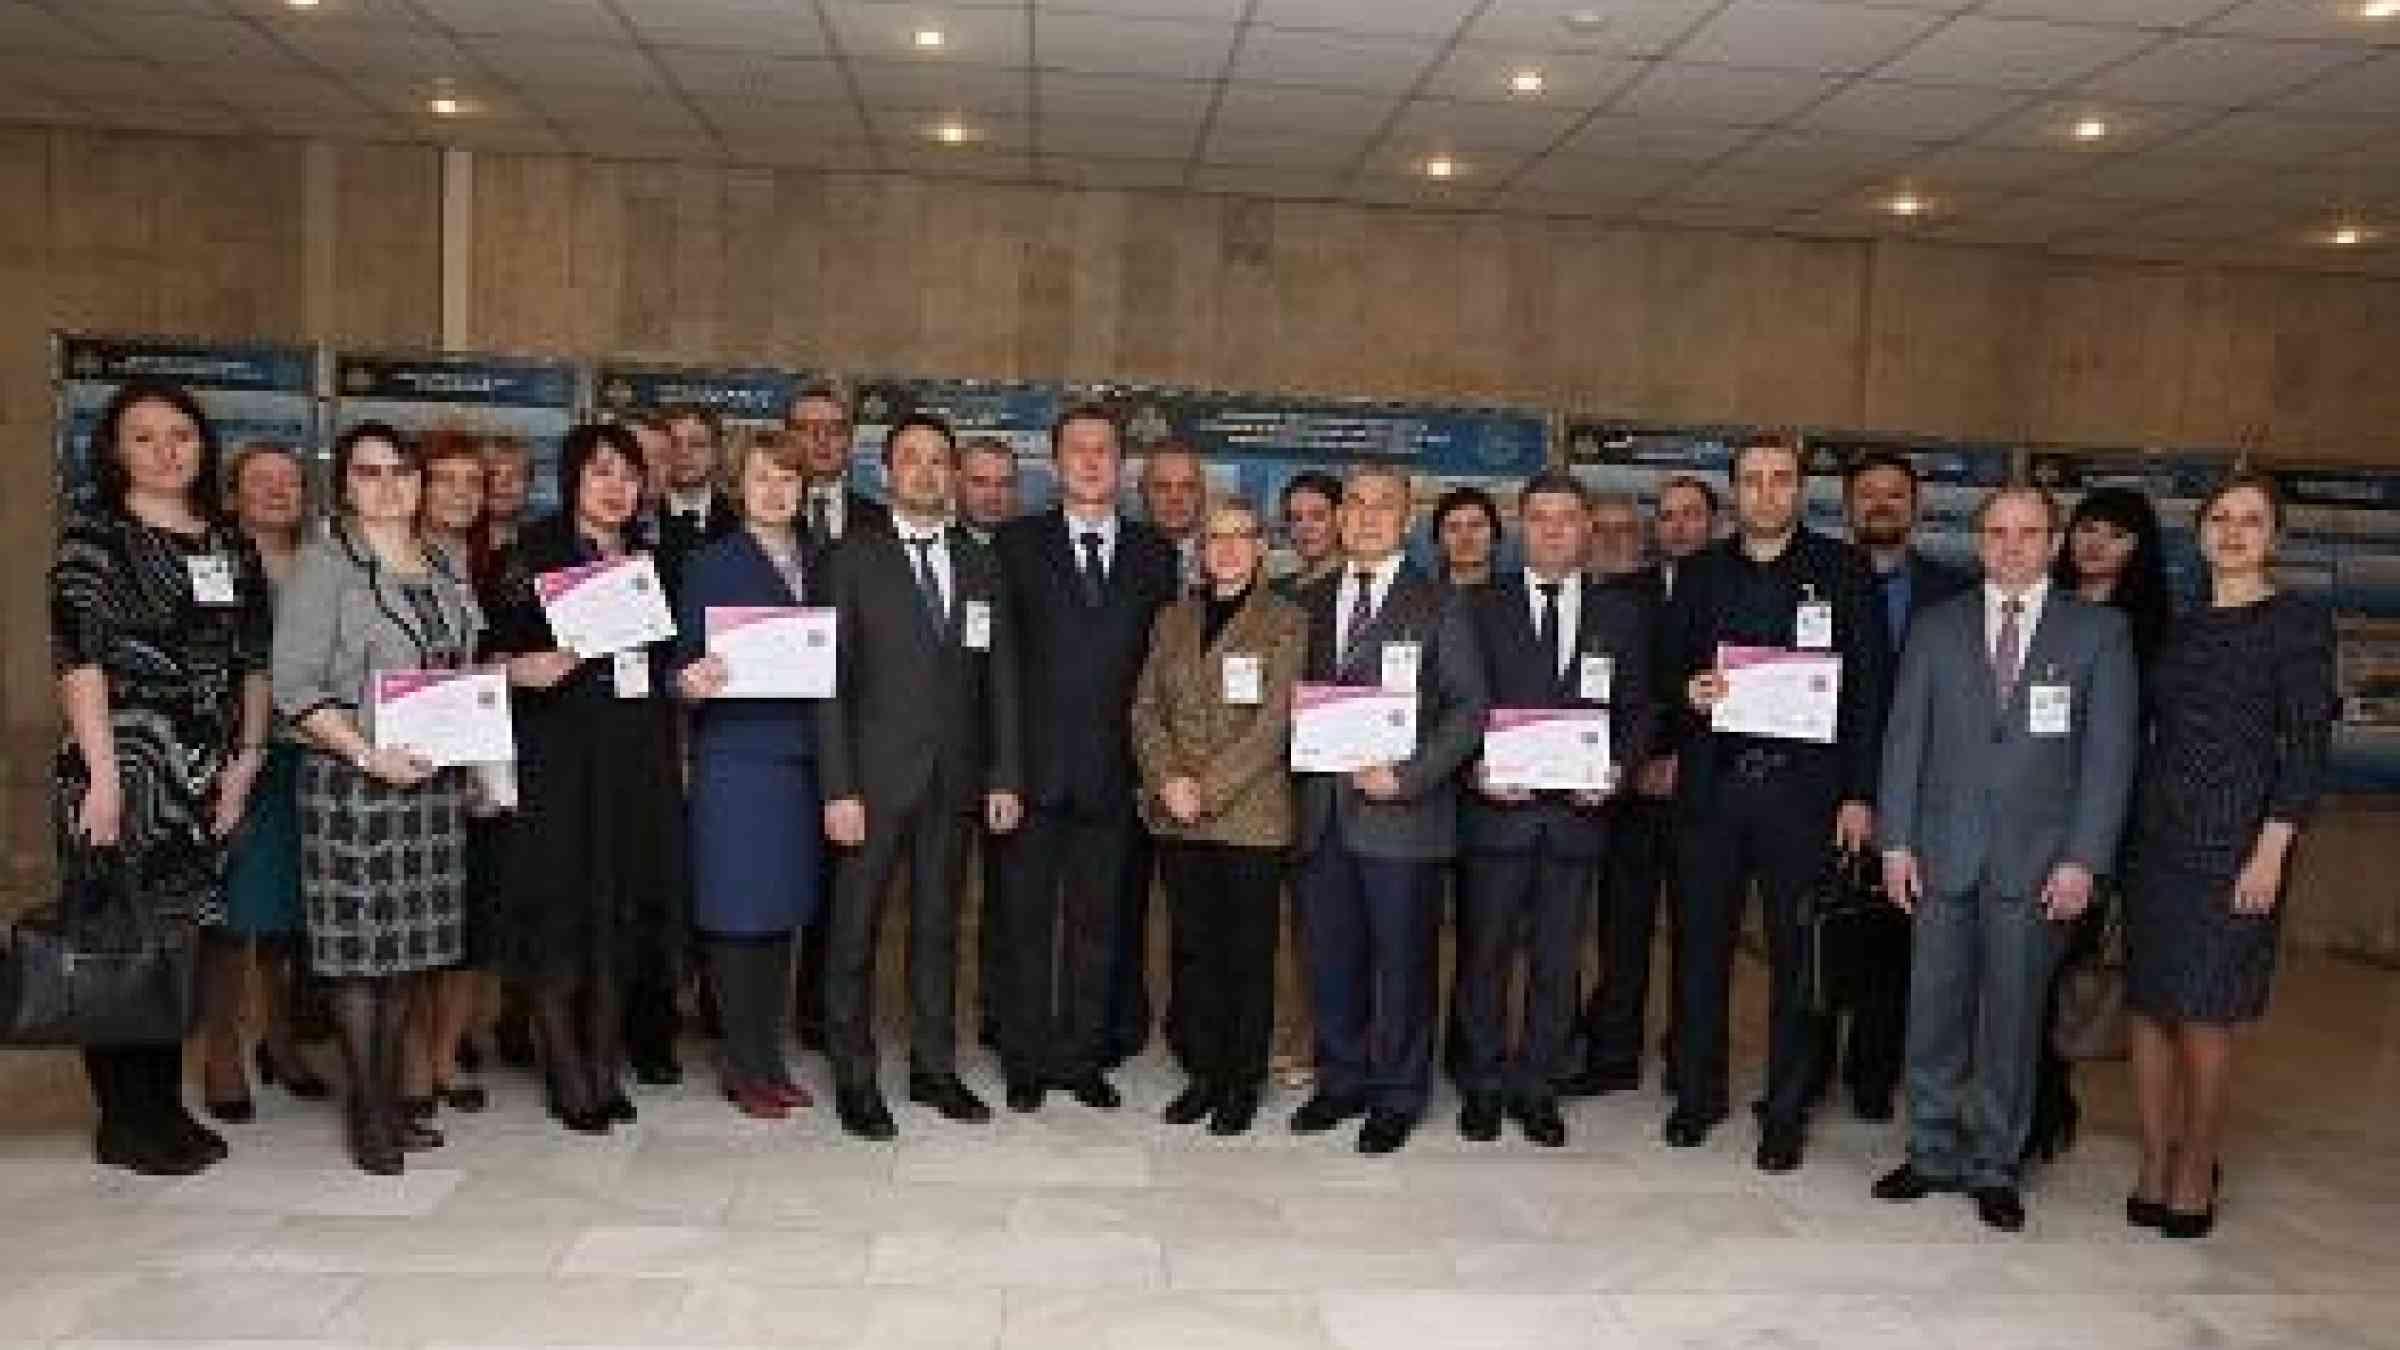 Representatives of the six Russian municipalities that have joined the Making Cities Resilient campaign display the certificates that they received at the event in Moscow (Photo: EMERCOM)